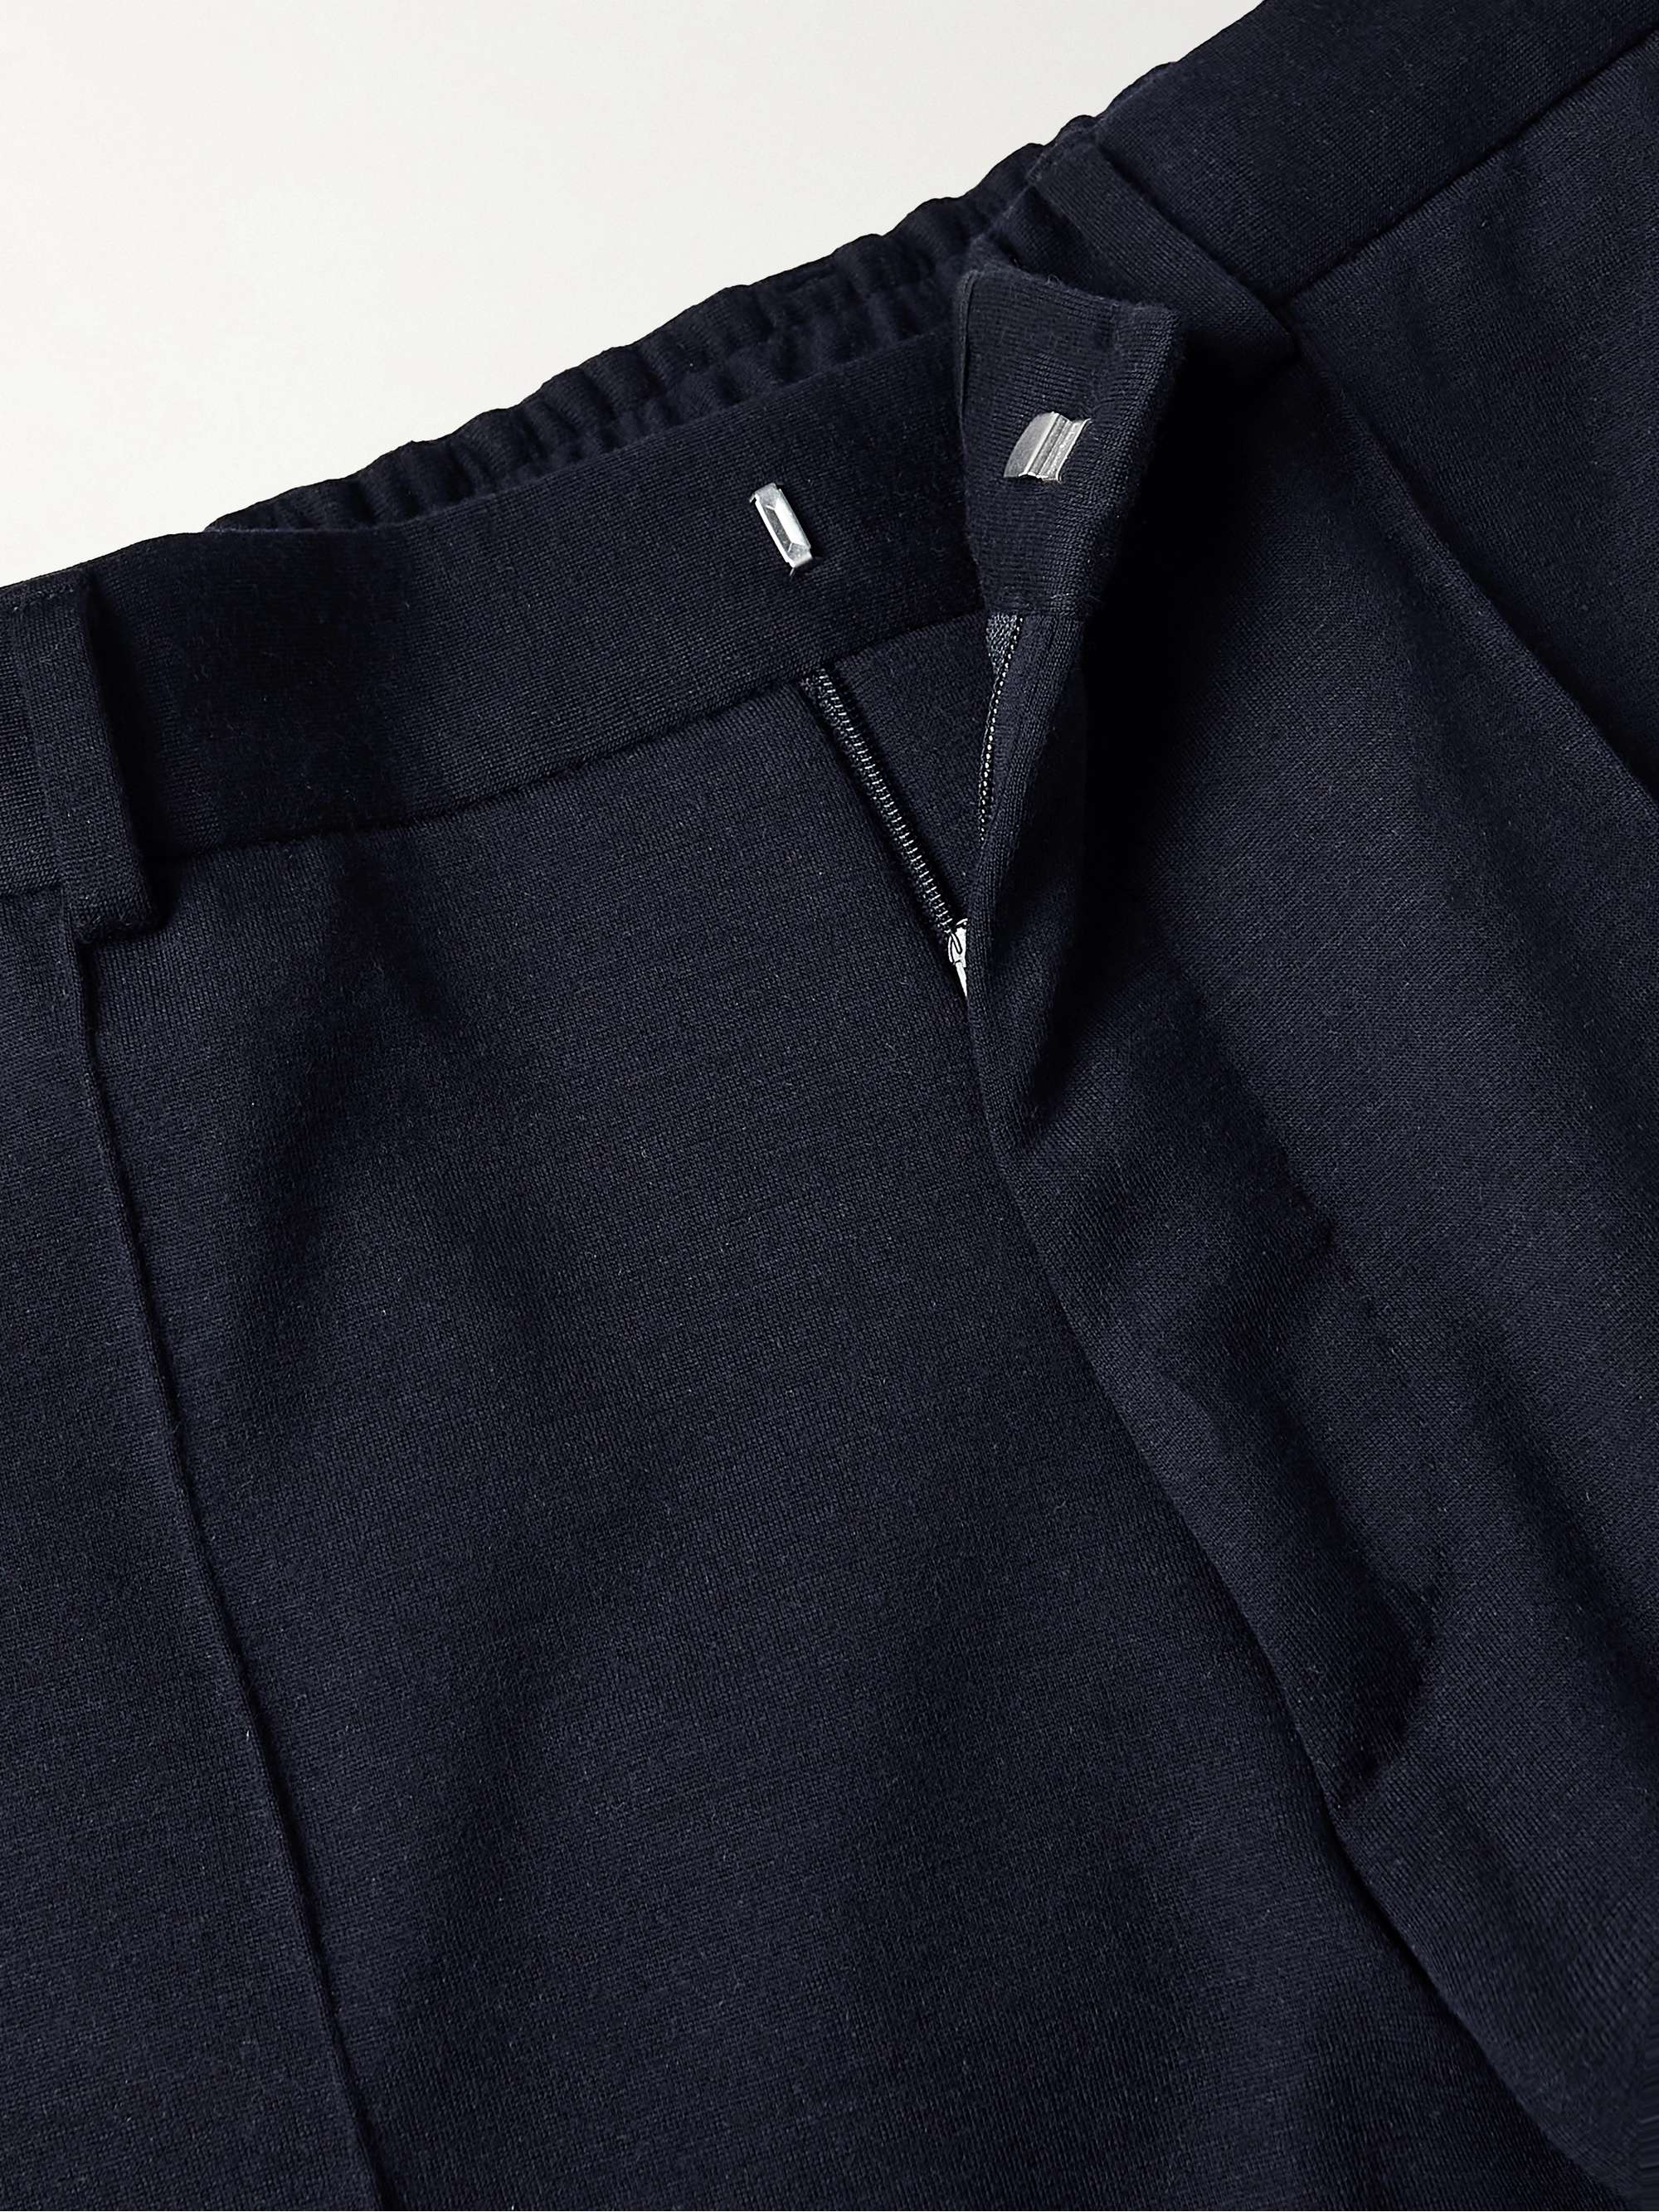 DUNHILL Straight-Leg Wool-Blend Jersey Suit Trousers